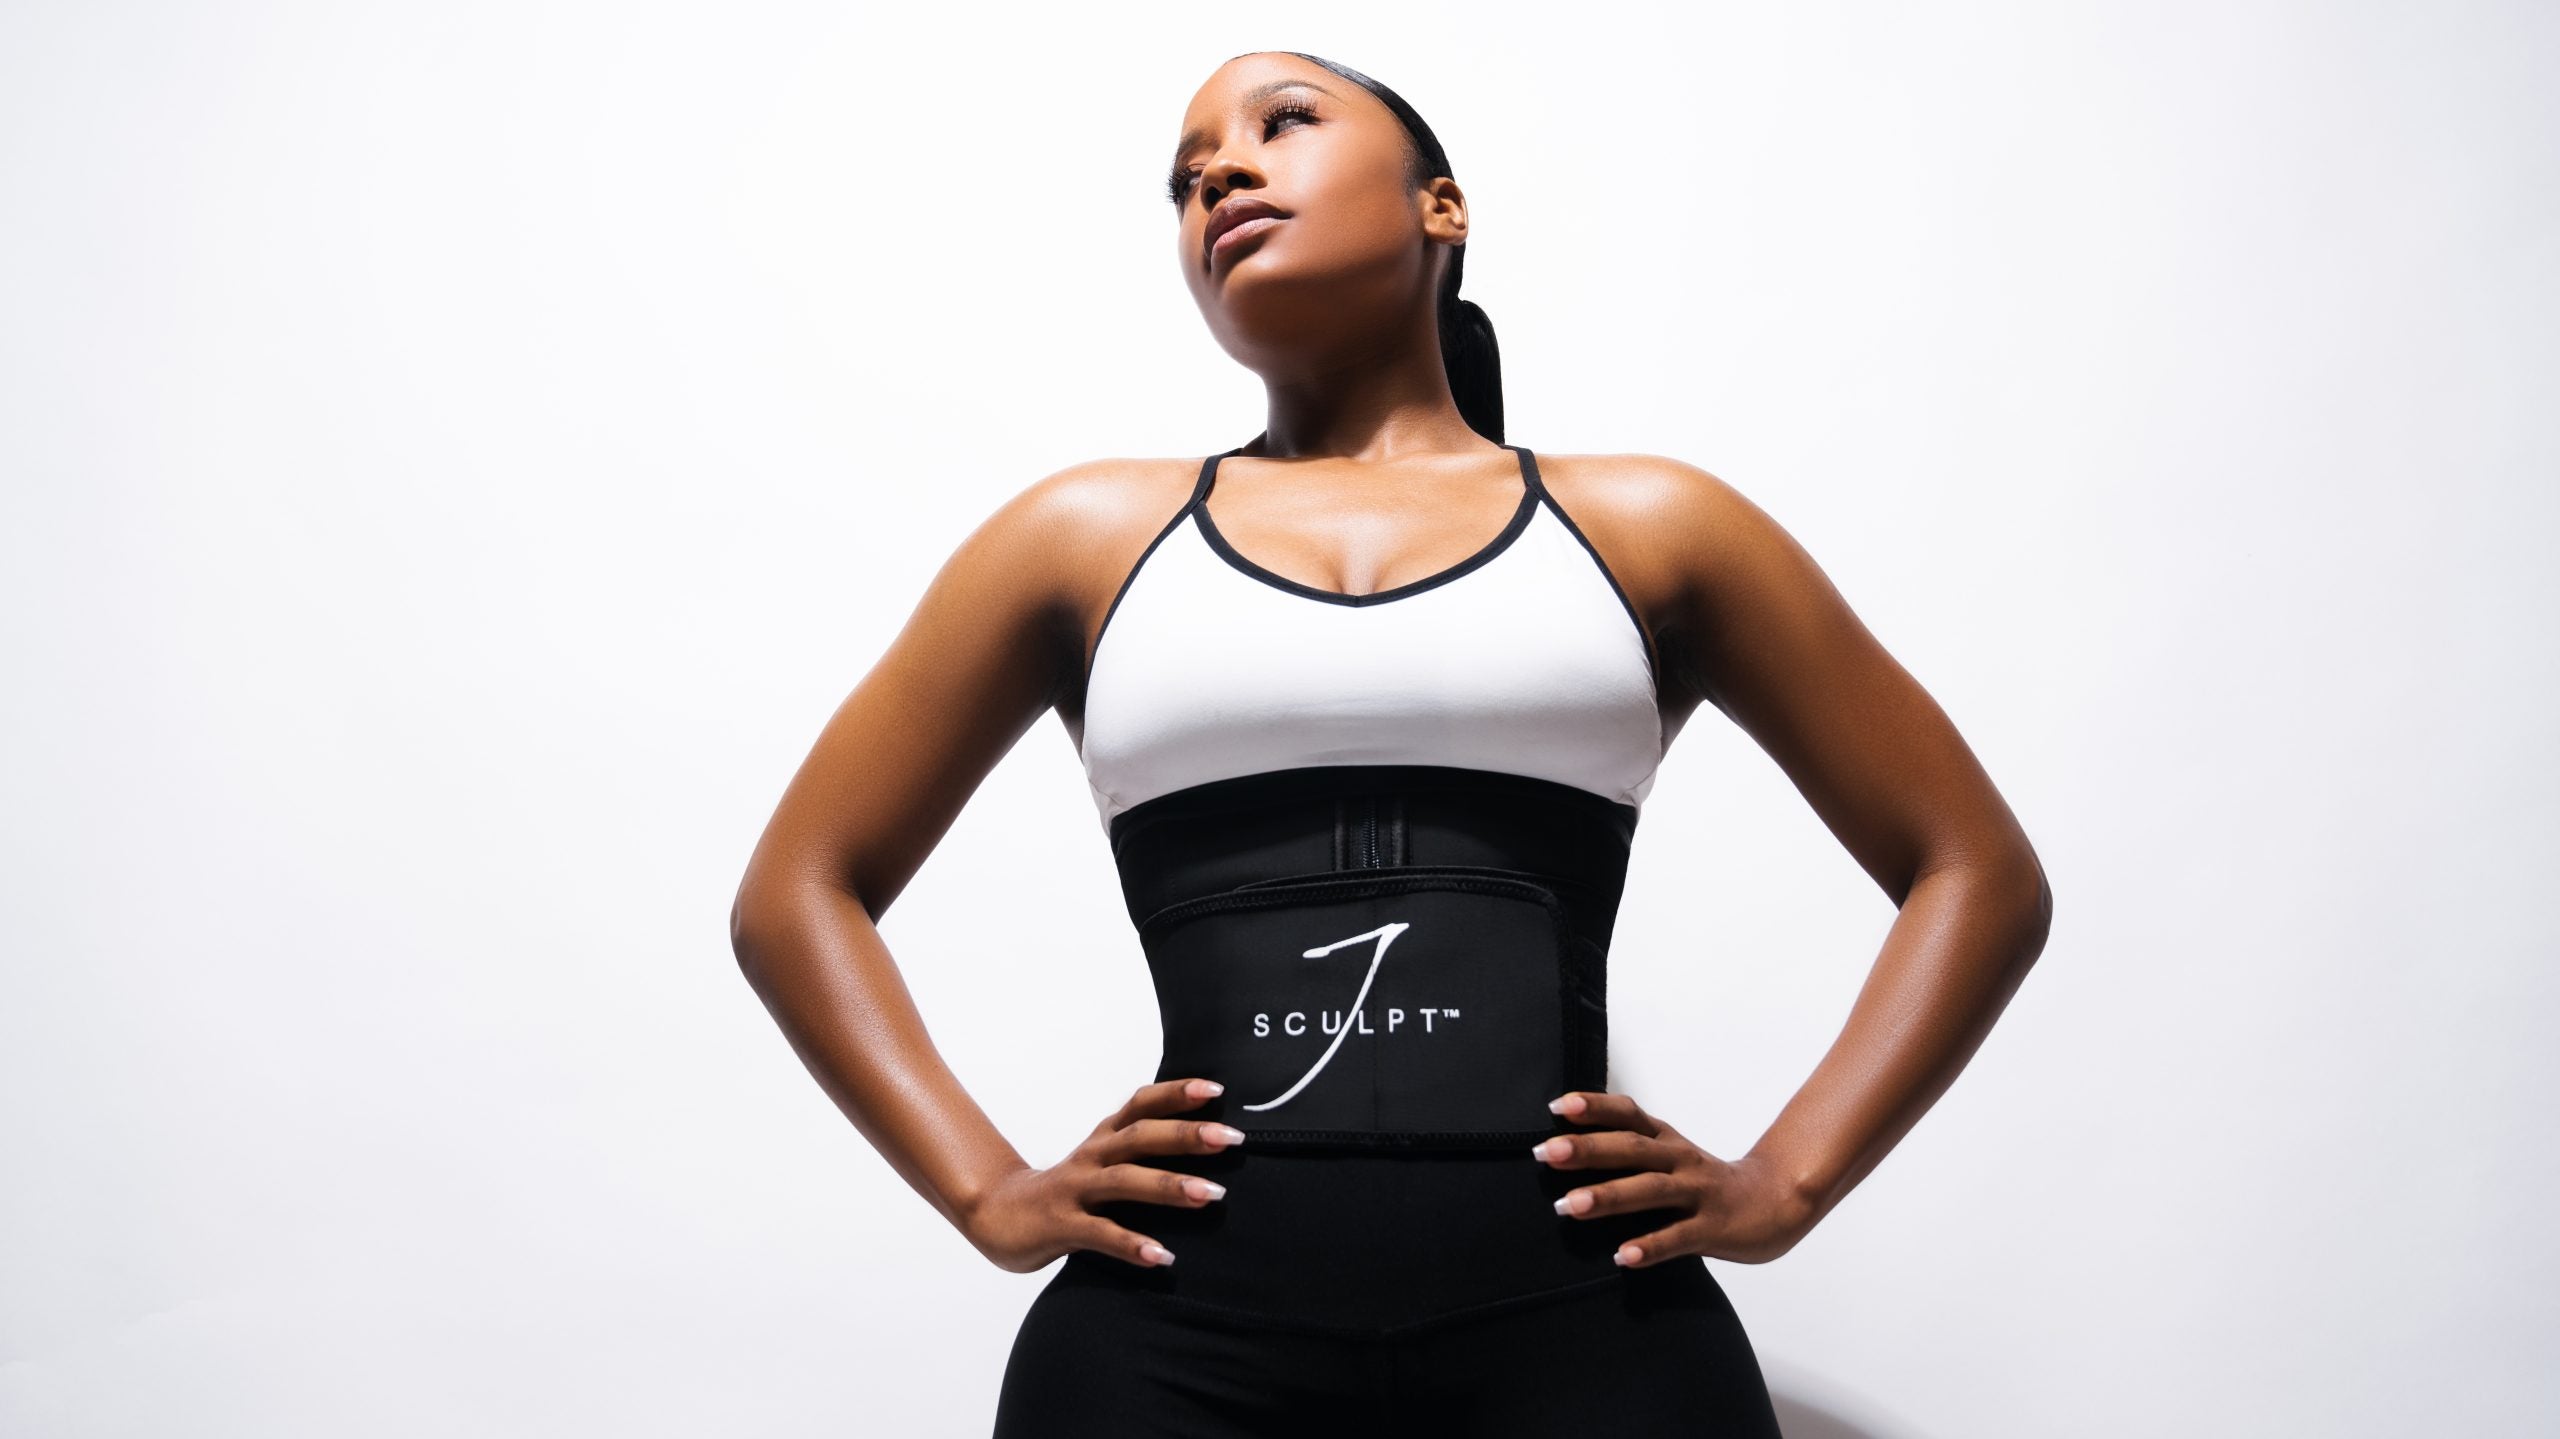 Embracing the Pivot: J Sculpt Founder Jaz Jackson On Why Battling Depression As A Beauty Influencer Led To Building A Wellness Empire Generating Millions